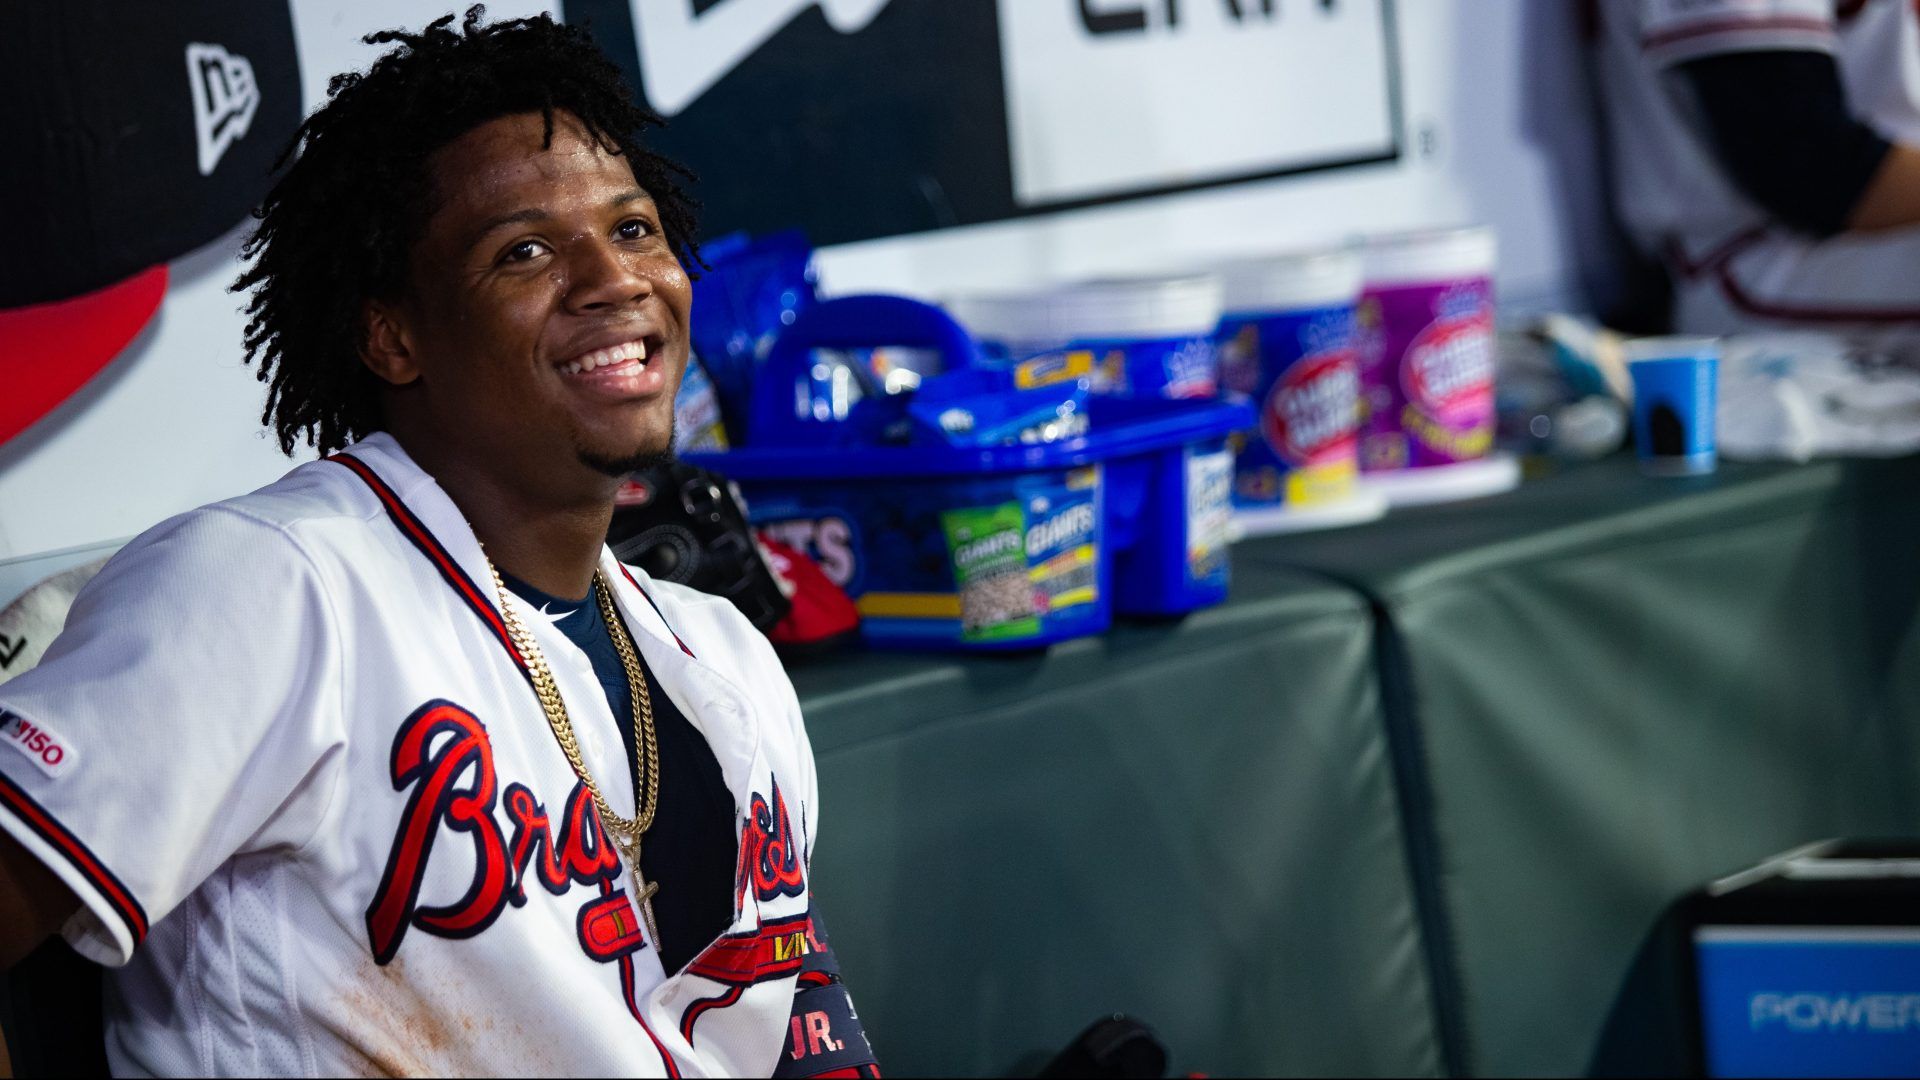 Grudge continues to fester between Braves, Marlins